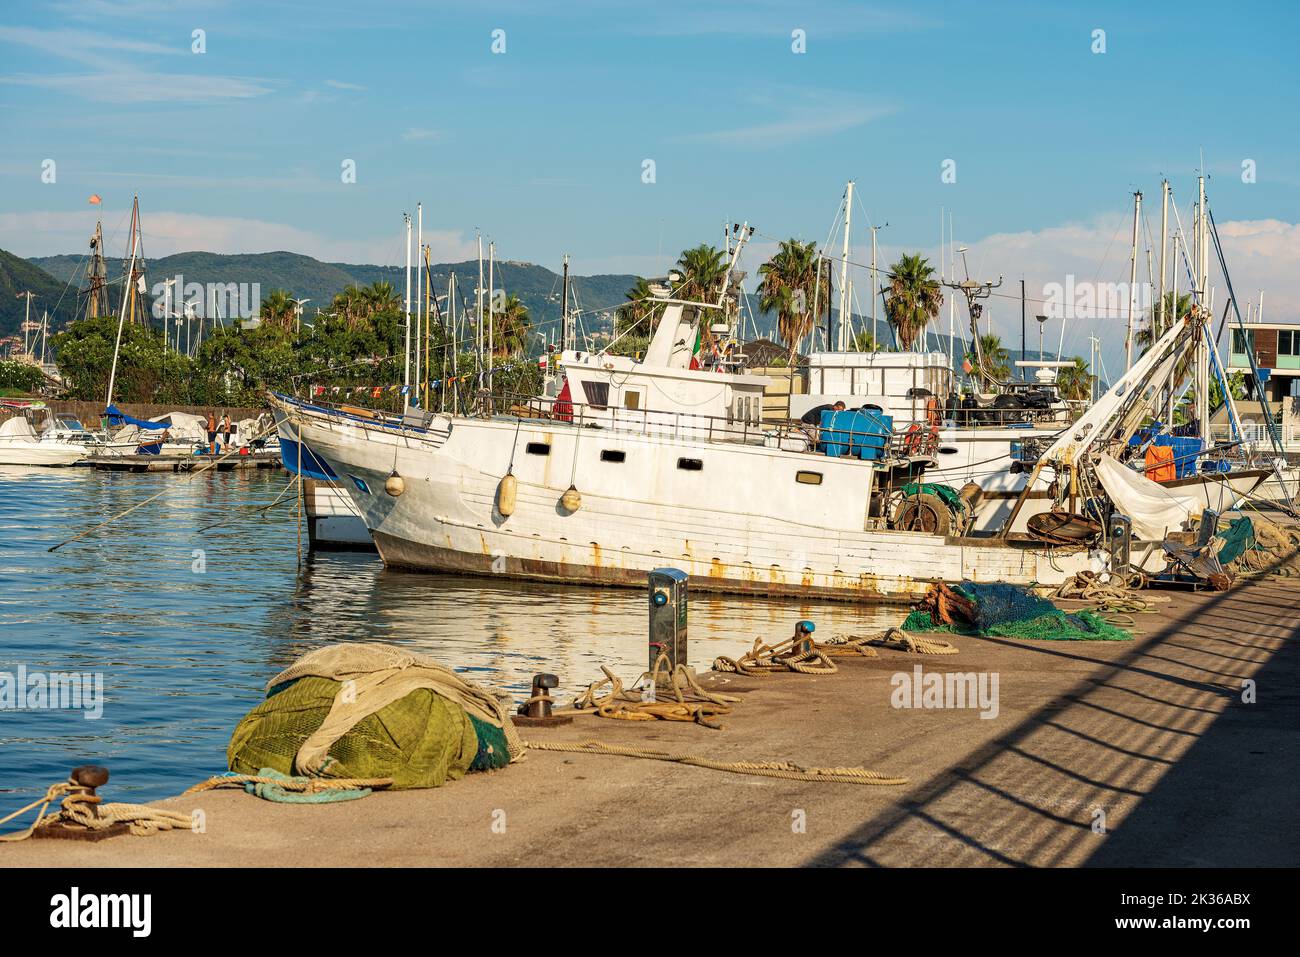 Fishing boats used for trawling (trawler), quayside with nets, ropes and moorage bollards. Port of La Spezia town, Gulf of La Spezia, Liguria, Italy. Stock Photo